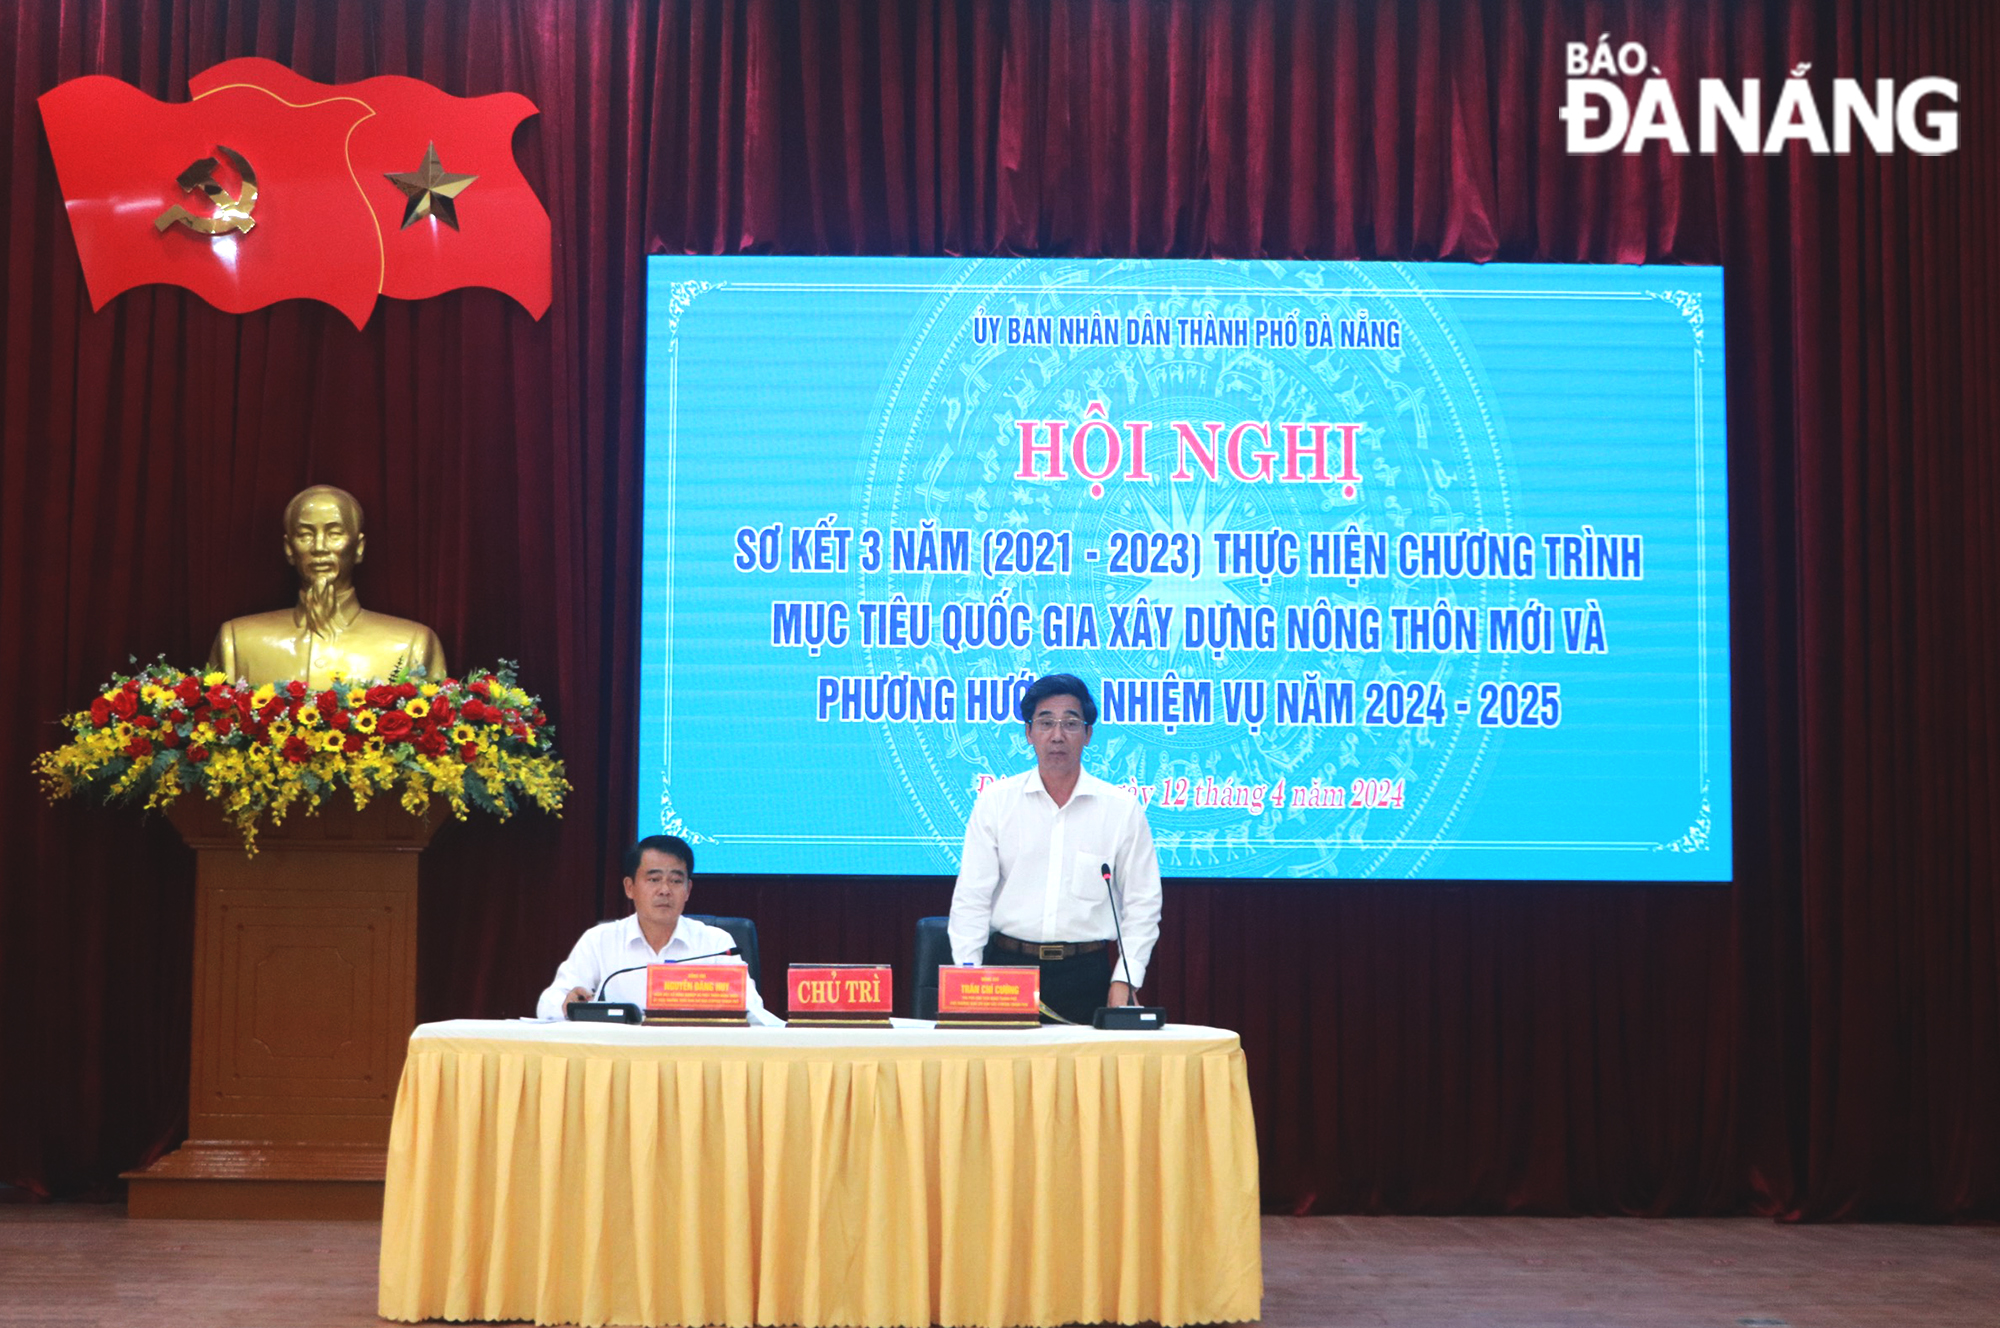 Vice Chairman of the Da Nang People's Committee Tran Chi Cuong (standing) and Director of the municipal Department of Agriculture and Rural Development Nguyen Dang Huy chairing the conference on the afternoon of April 12. Photo: VAN HOANG